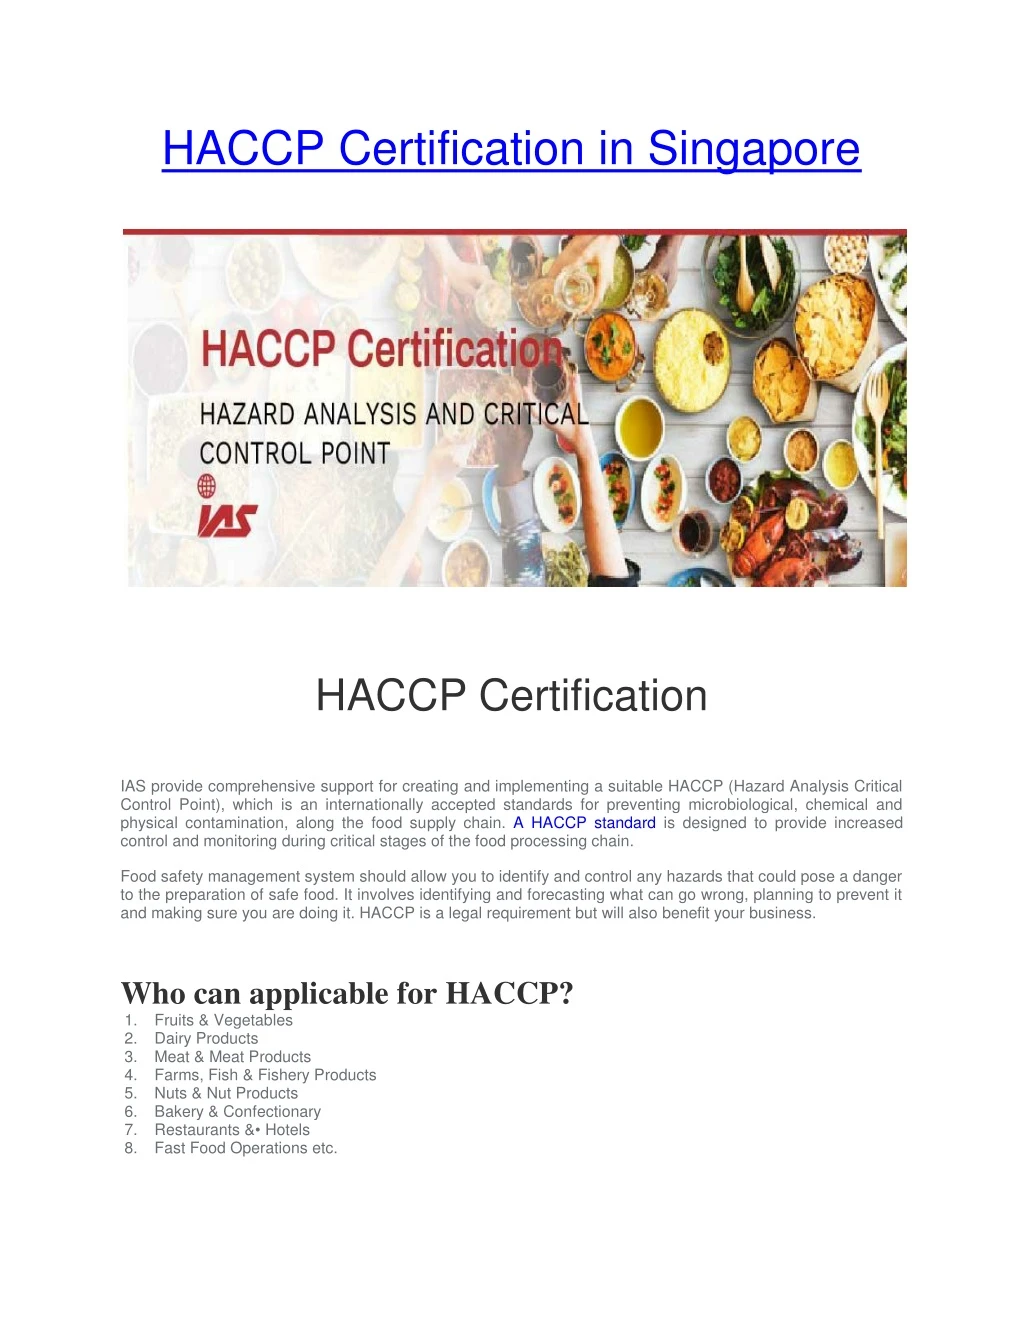 haccp certification in singapore